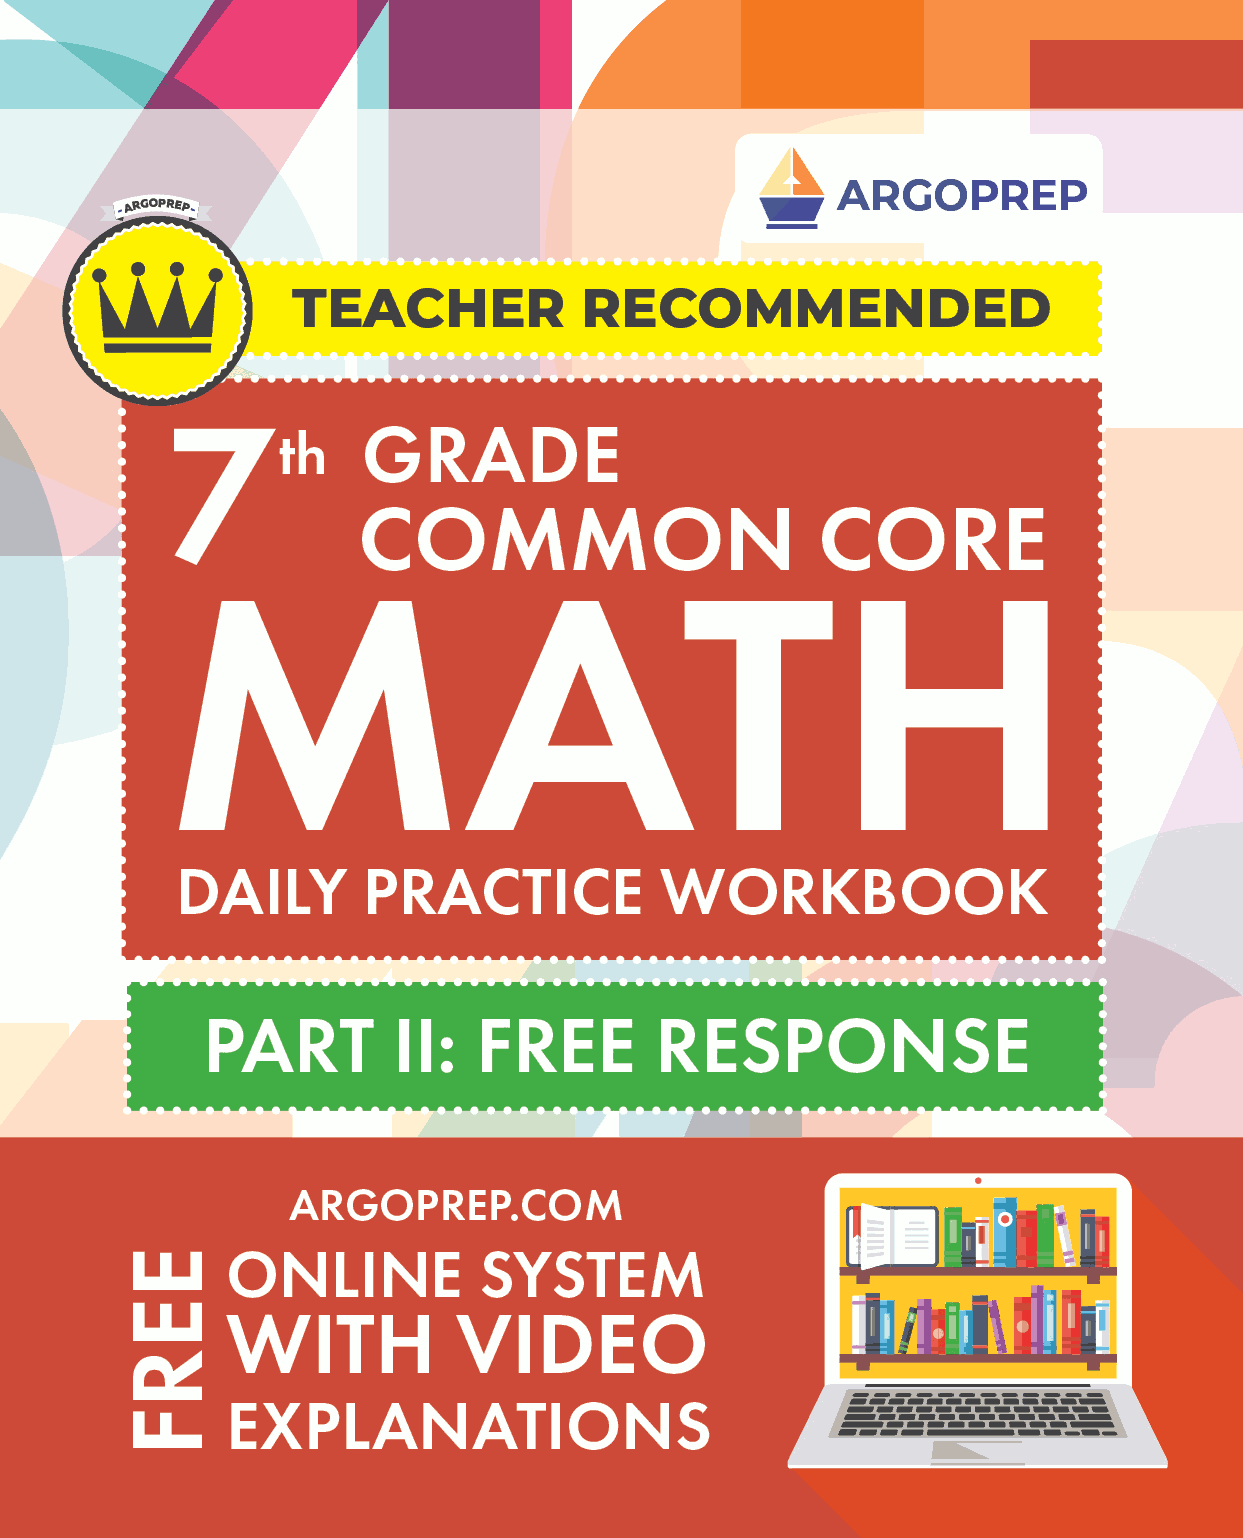 7th-grade-common-core-math-daily-practice-workbook-part-ii-free